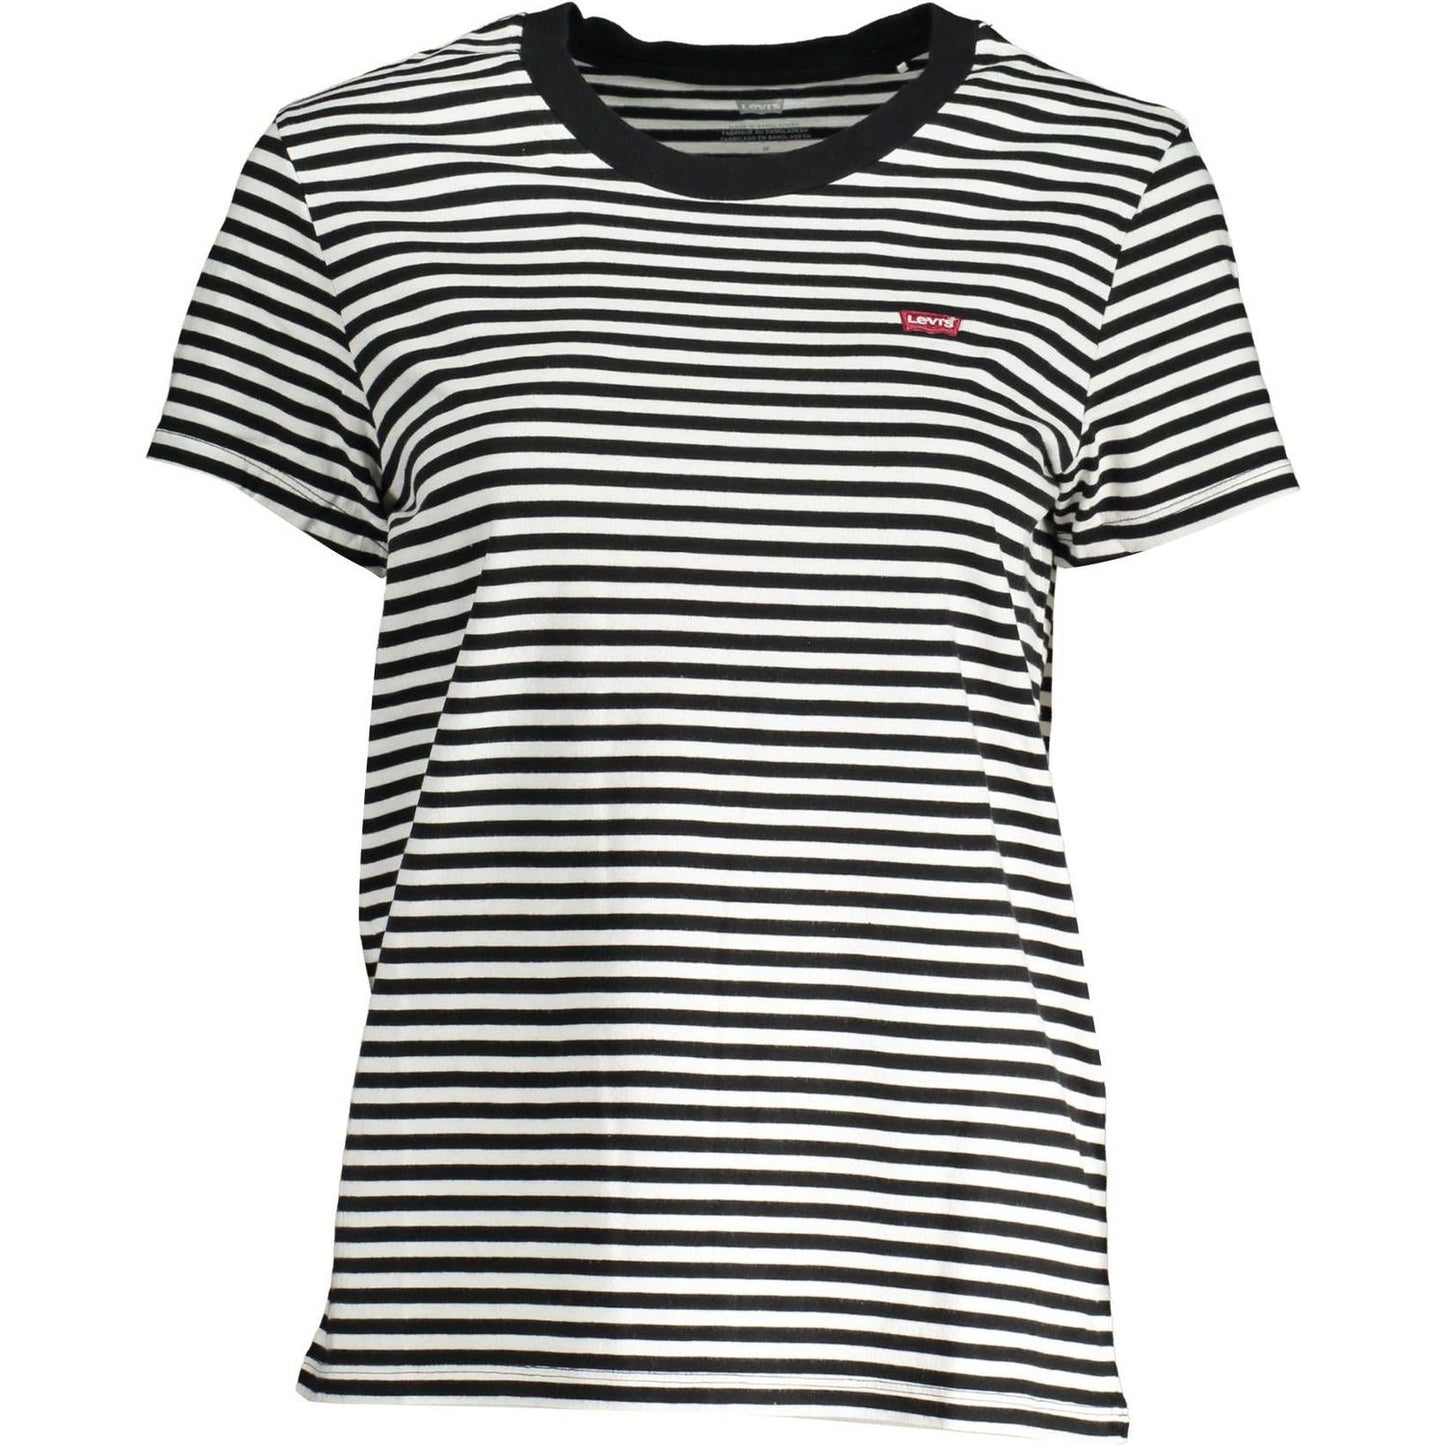 Levi's Chic Black Cotton Tee with Classic Logo chic-black-cotton-tee-with-classic-logo